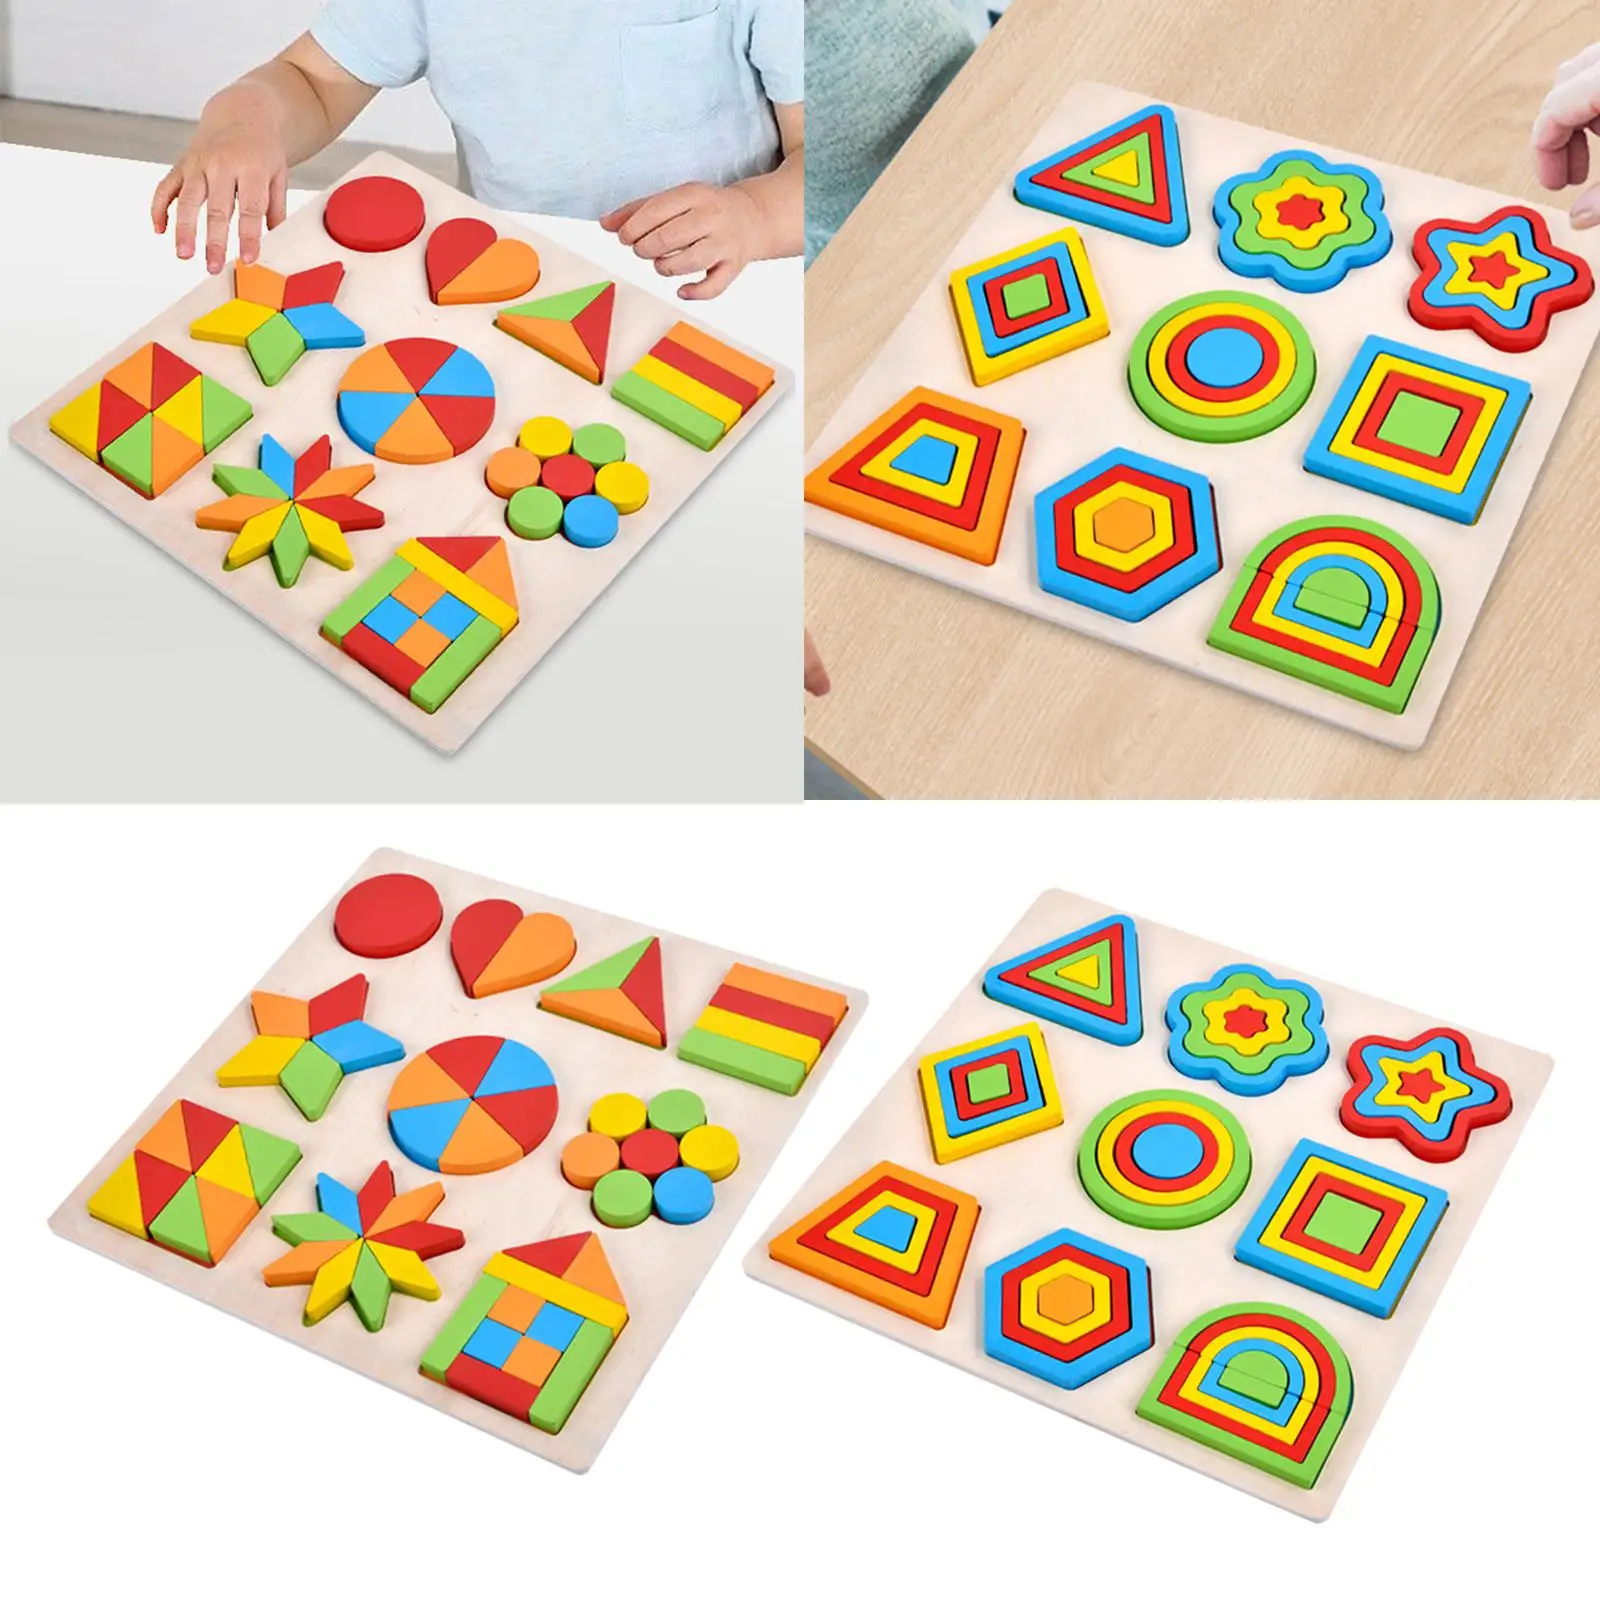 Wooden Puzzle Fine Motor Skills Montessori Colorful Teaching Aids Manipulative Puzzle for Kids Girls Birthday Gift